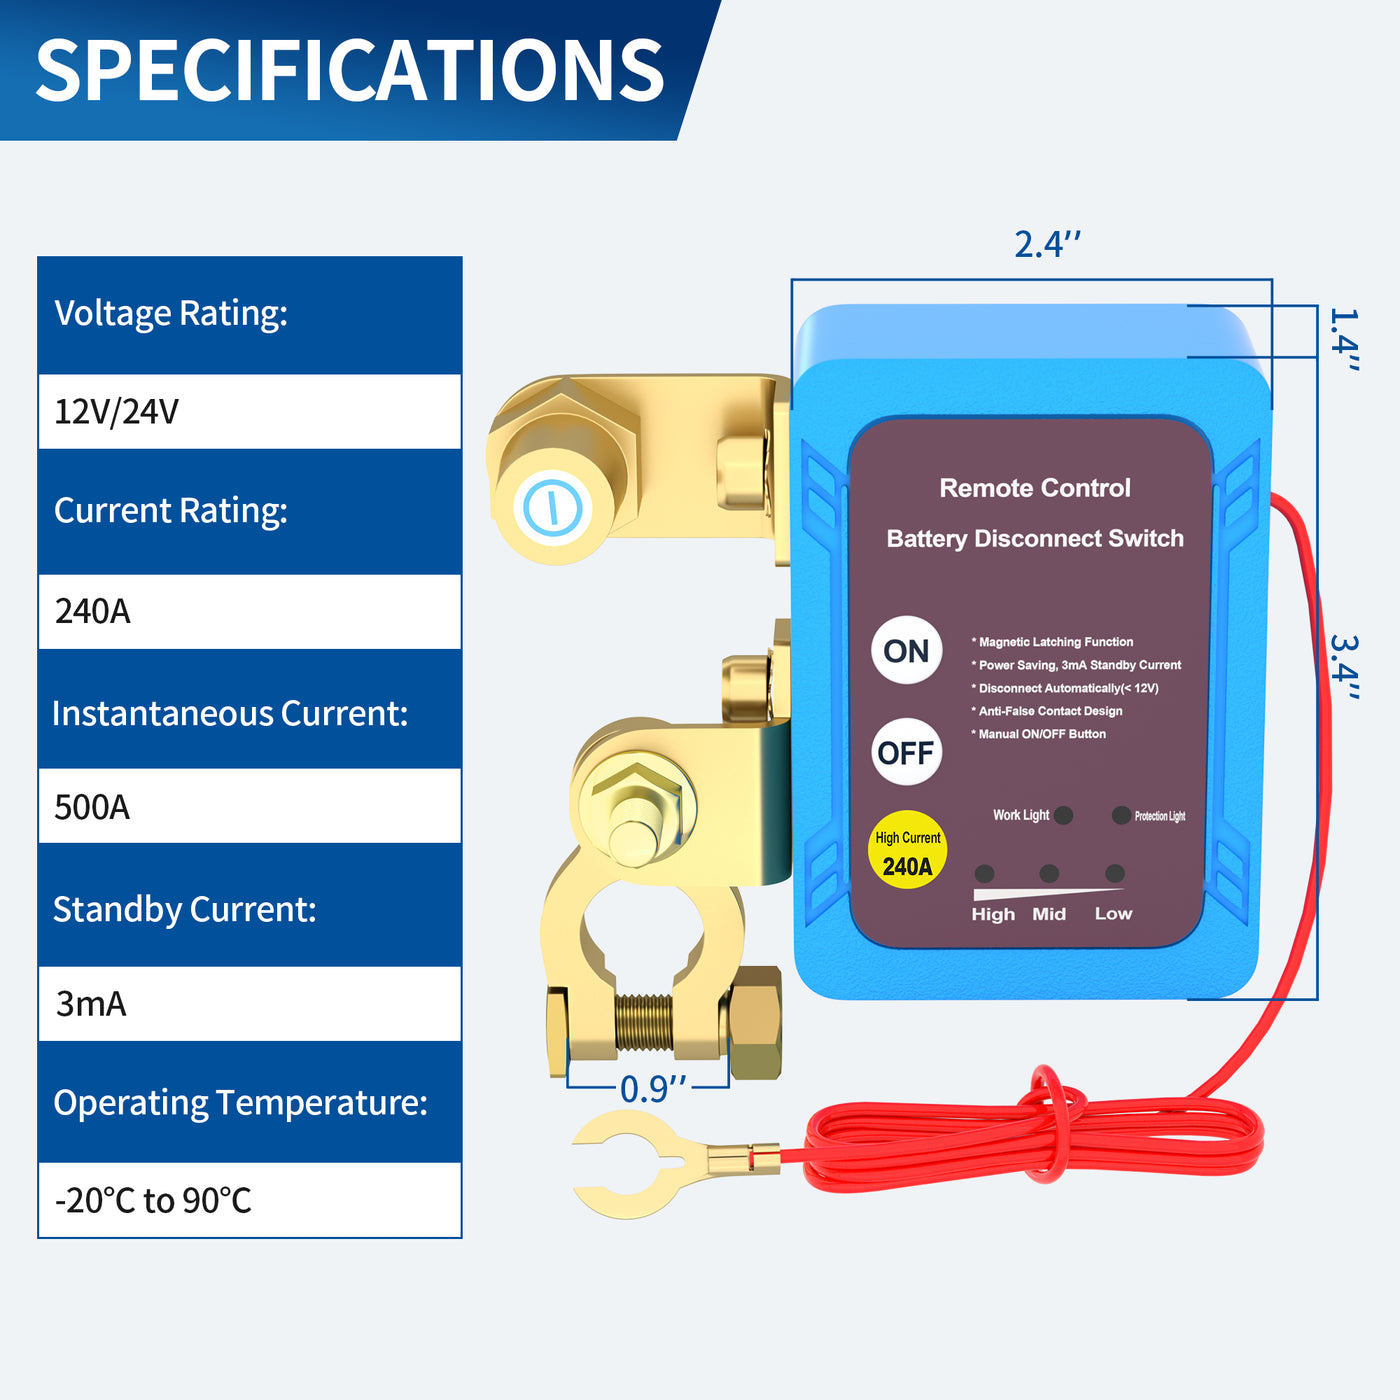 RL-240A-RCM2 Remote Control Battery Disconnect Switch Specifications